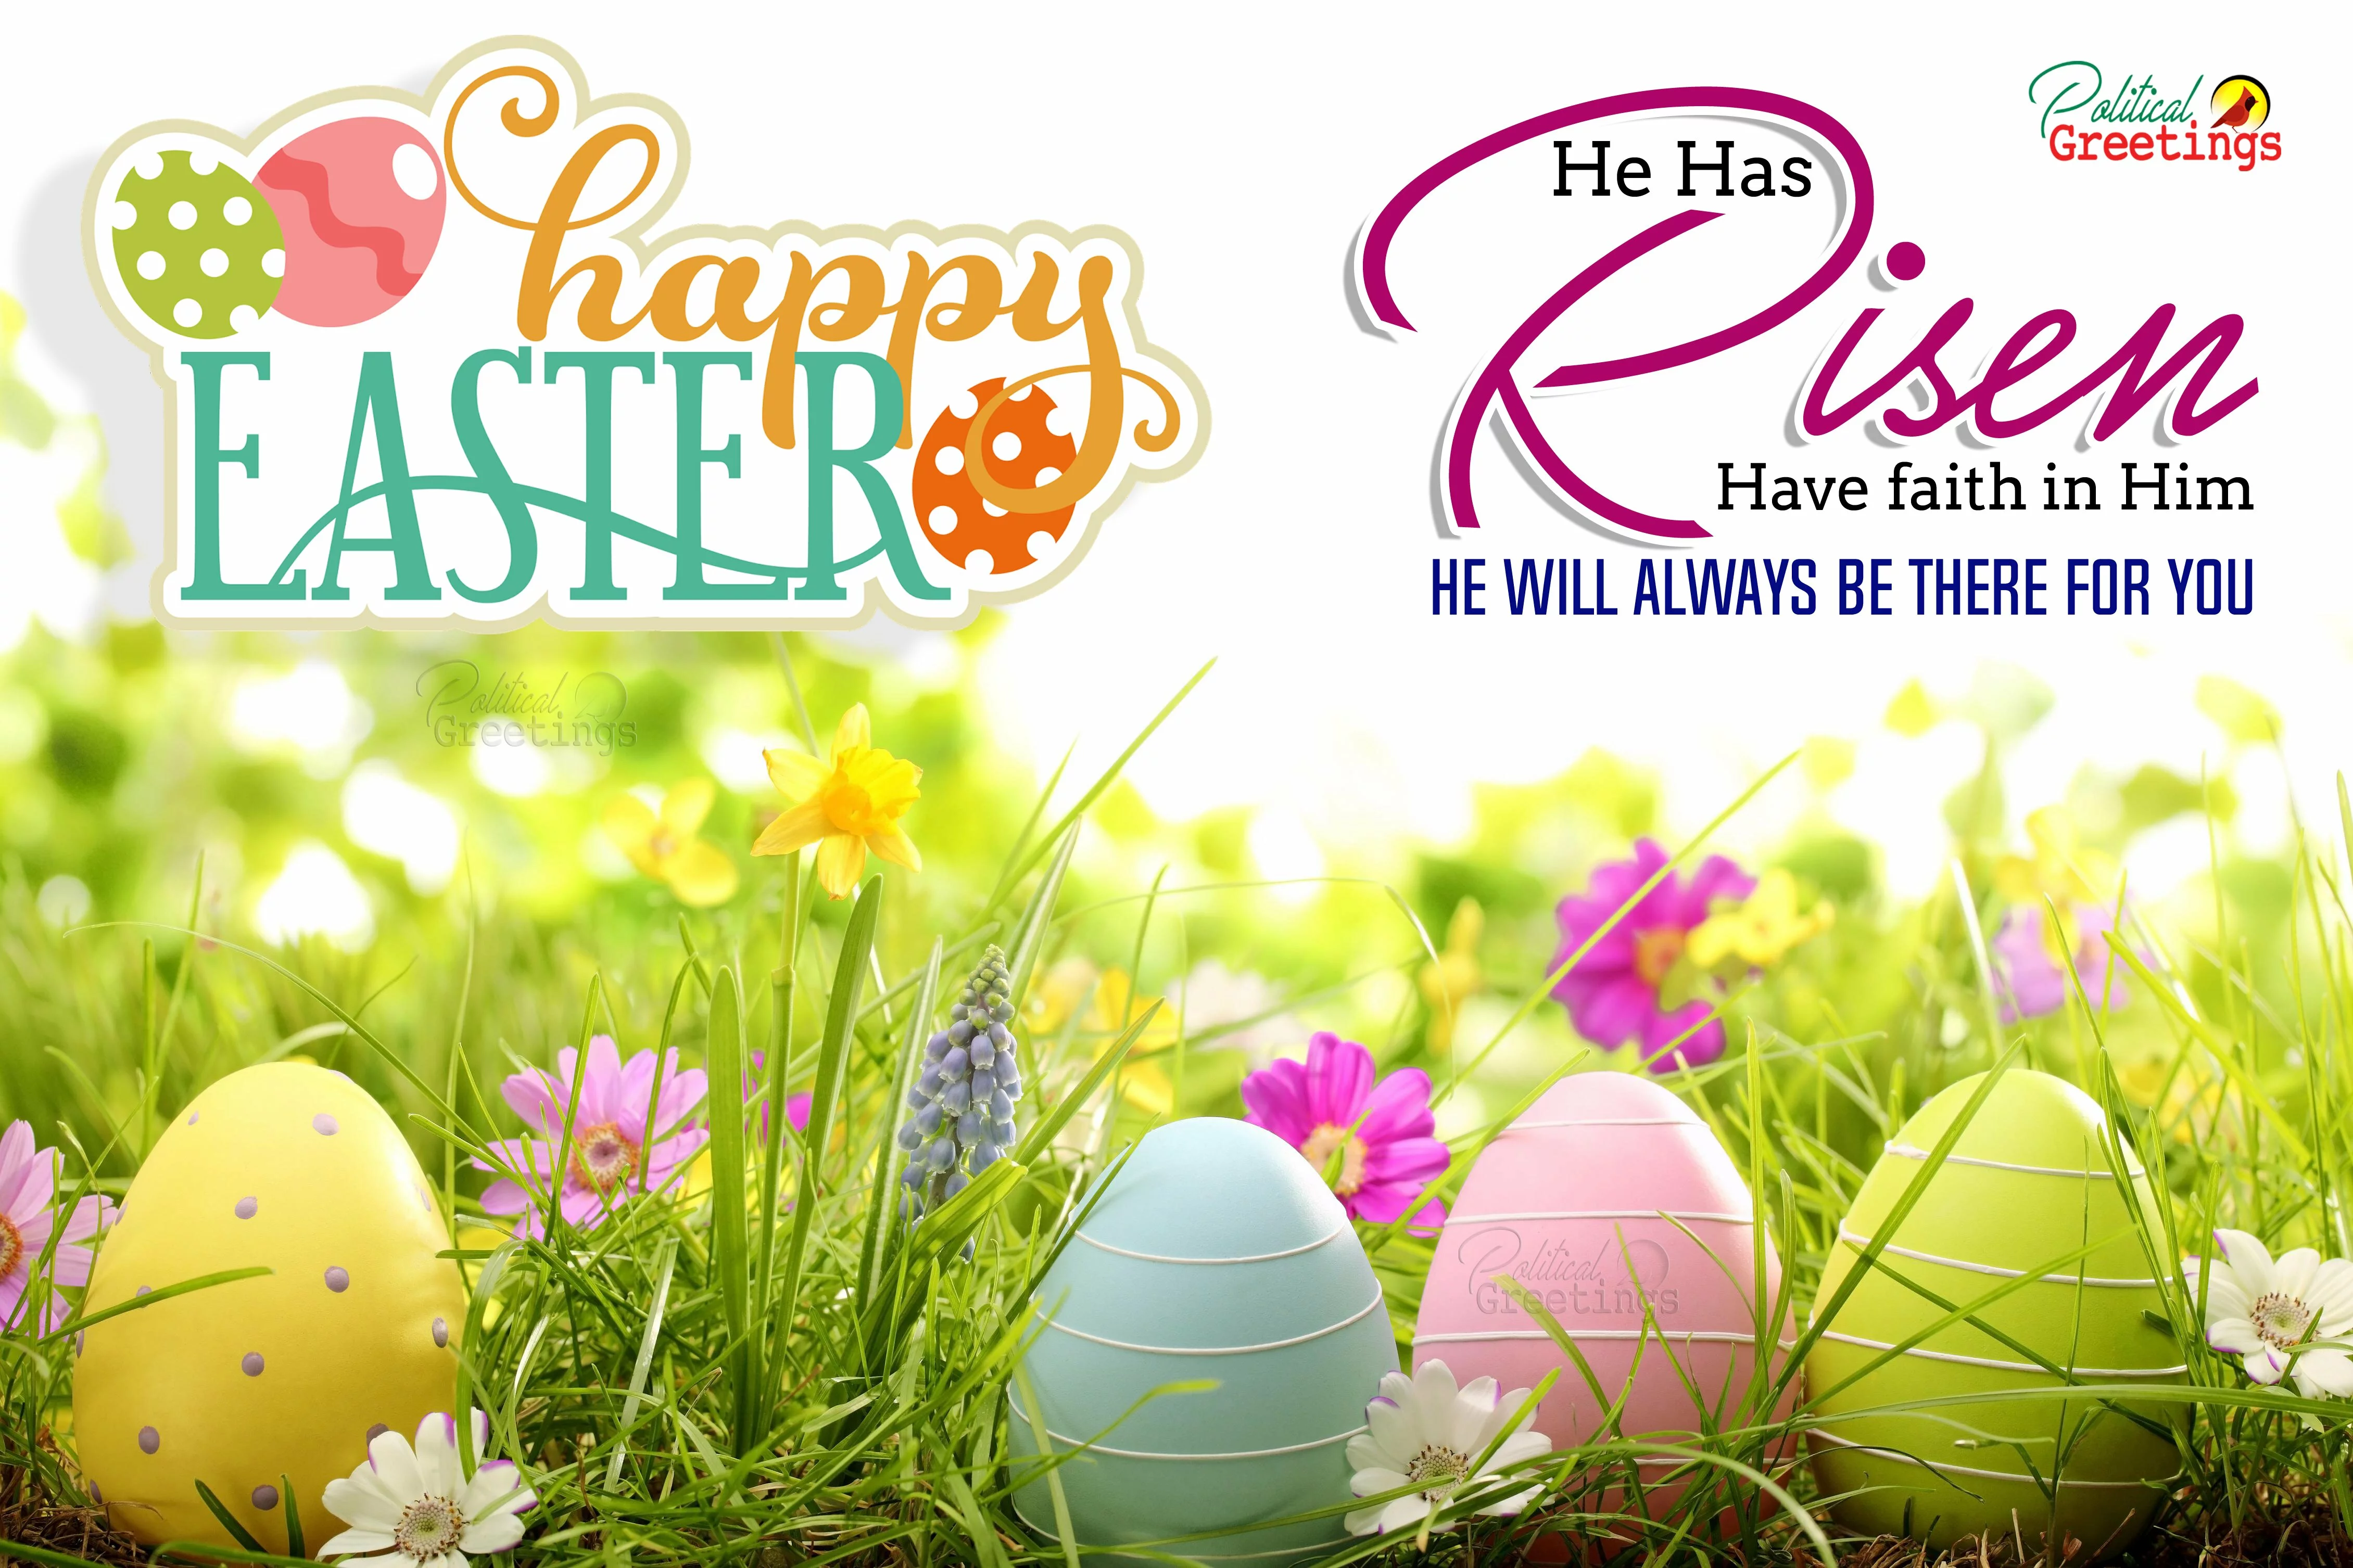 happy easter wishes quotes and greetings from bilble verse